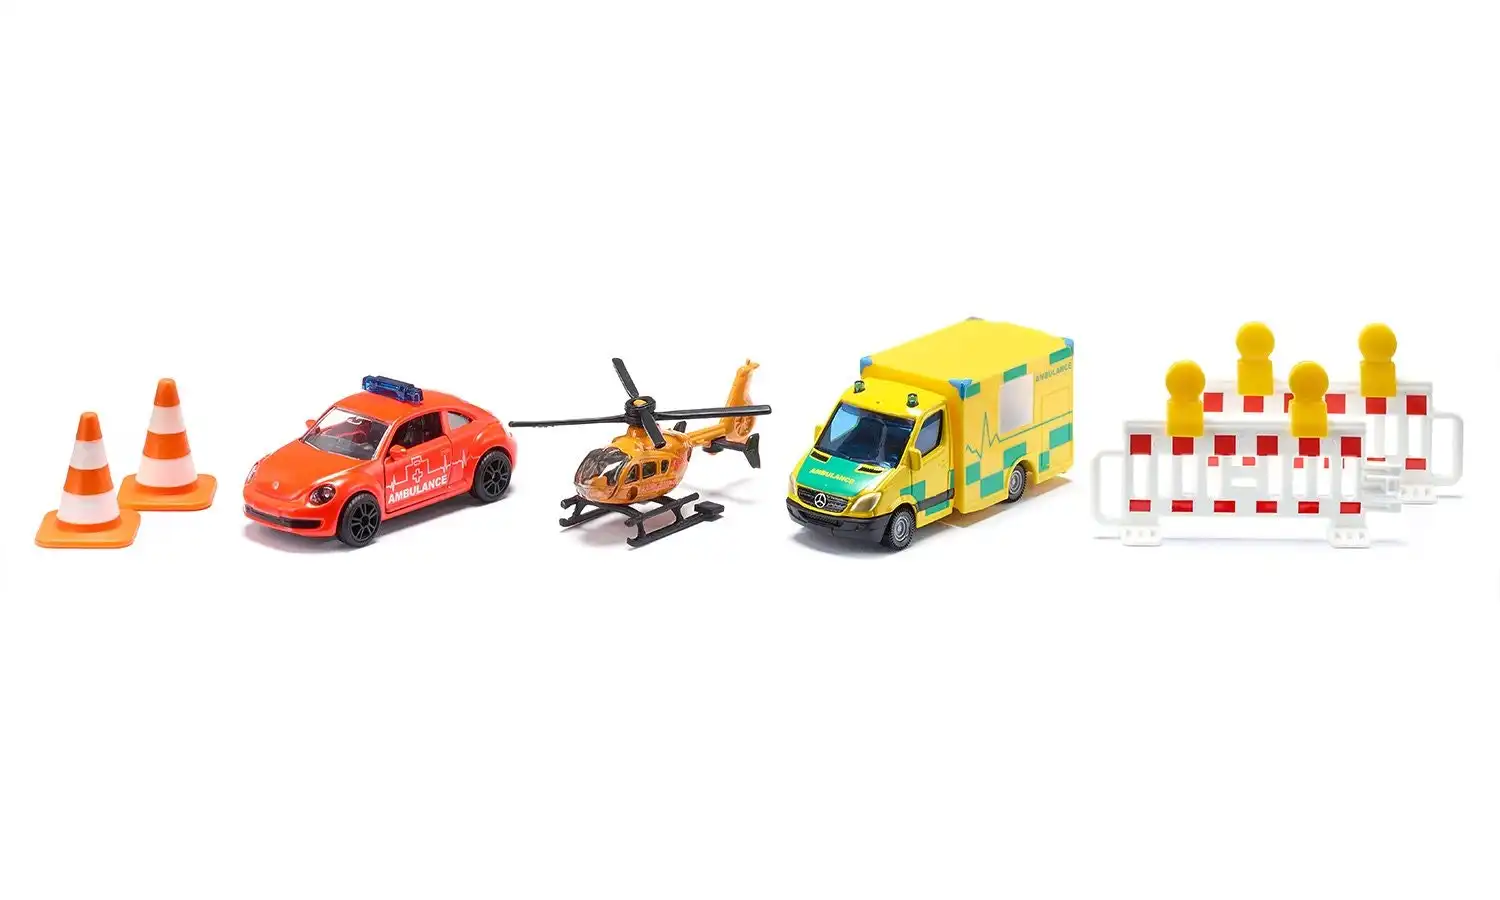 Siku - Emergency Vehicle Rescue Gift Set 3 X Vehicle Playset Includes Accessories